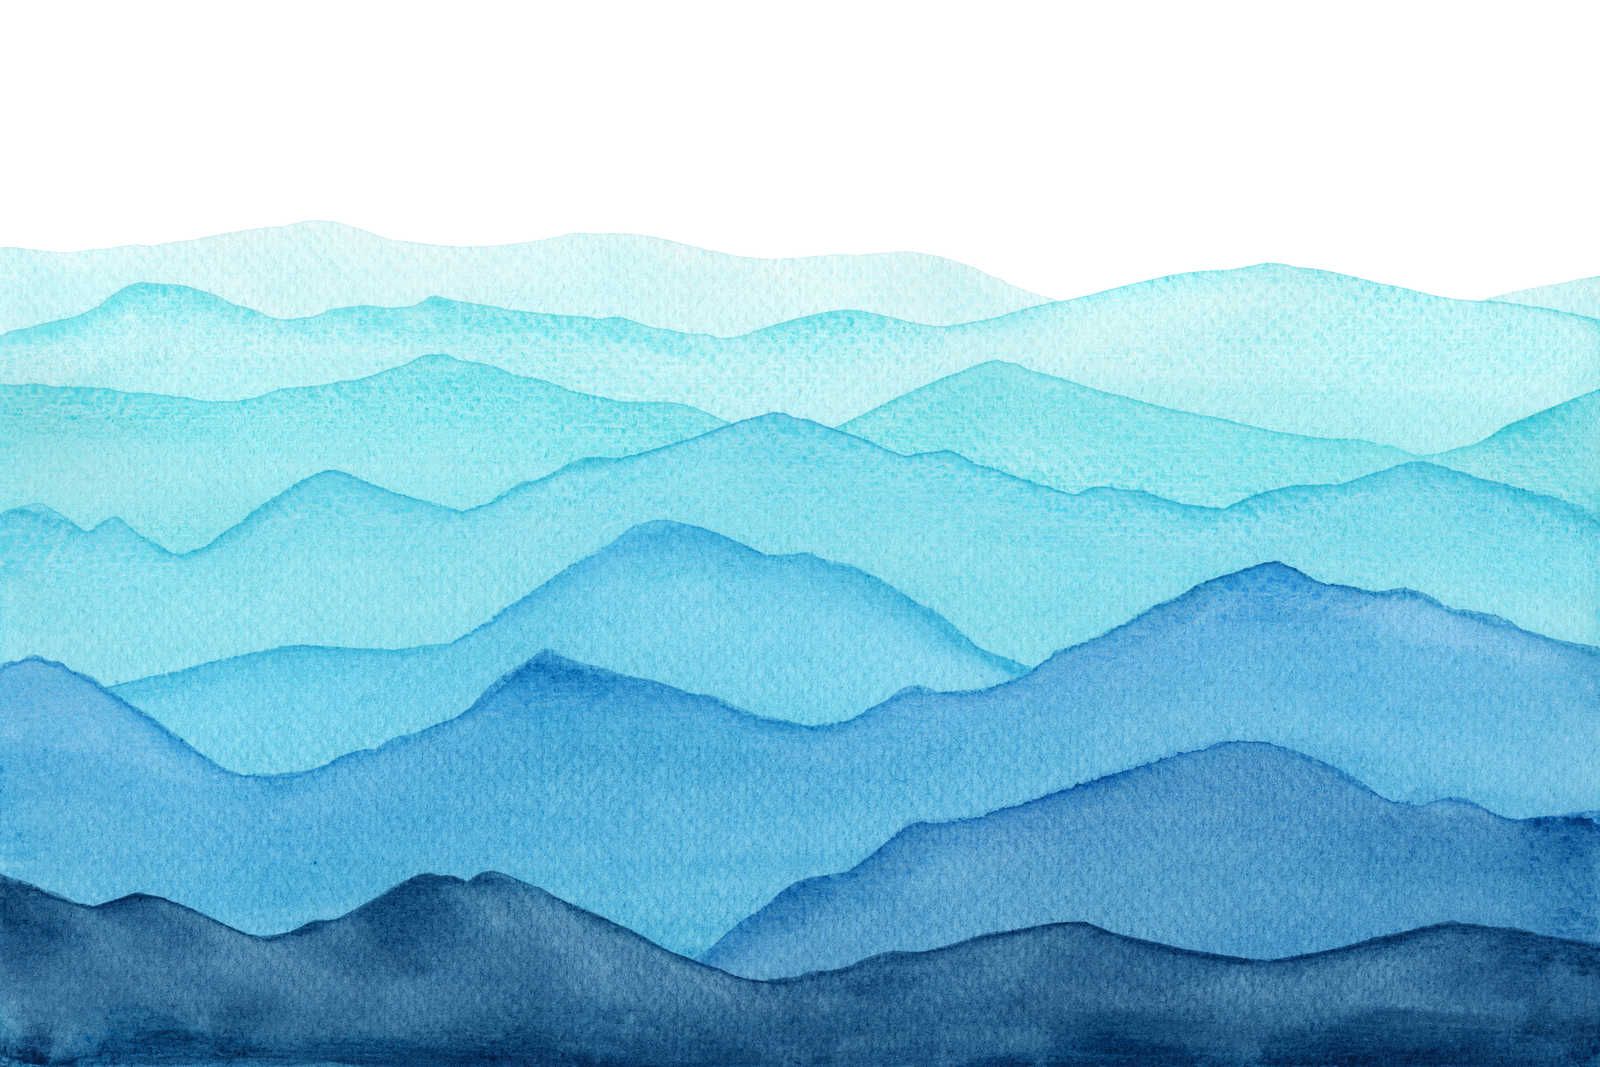             Canvas Sea with waves in watercolour - 90 cm x 60 cm
        